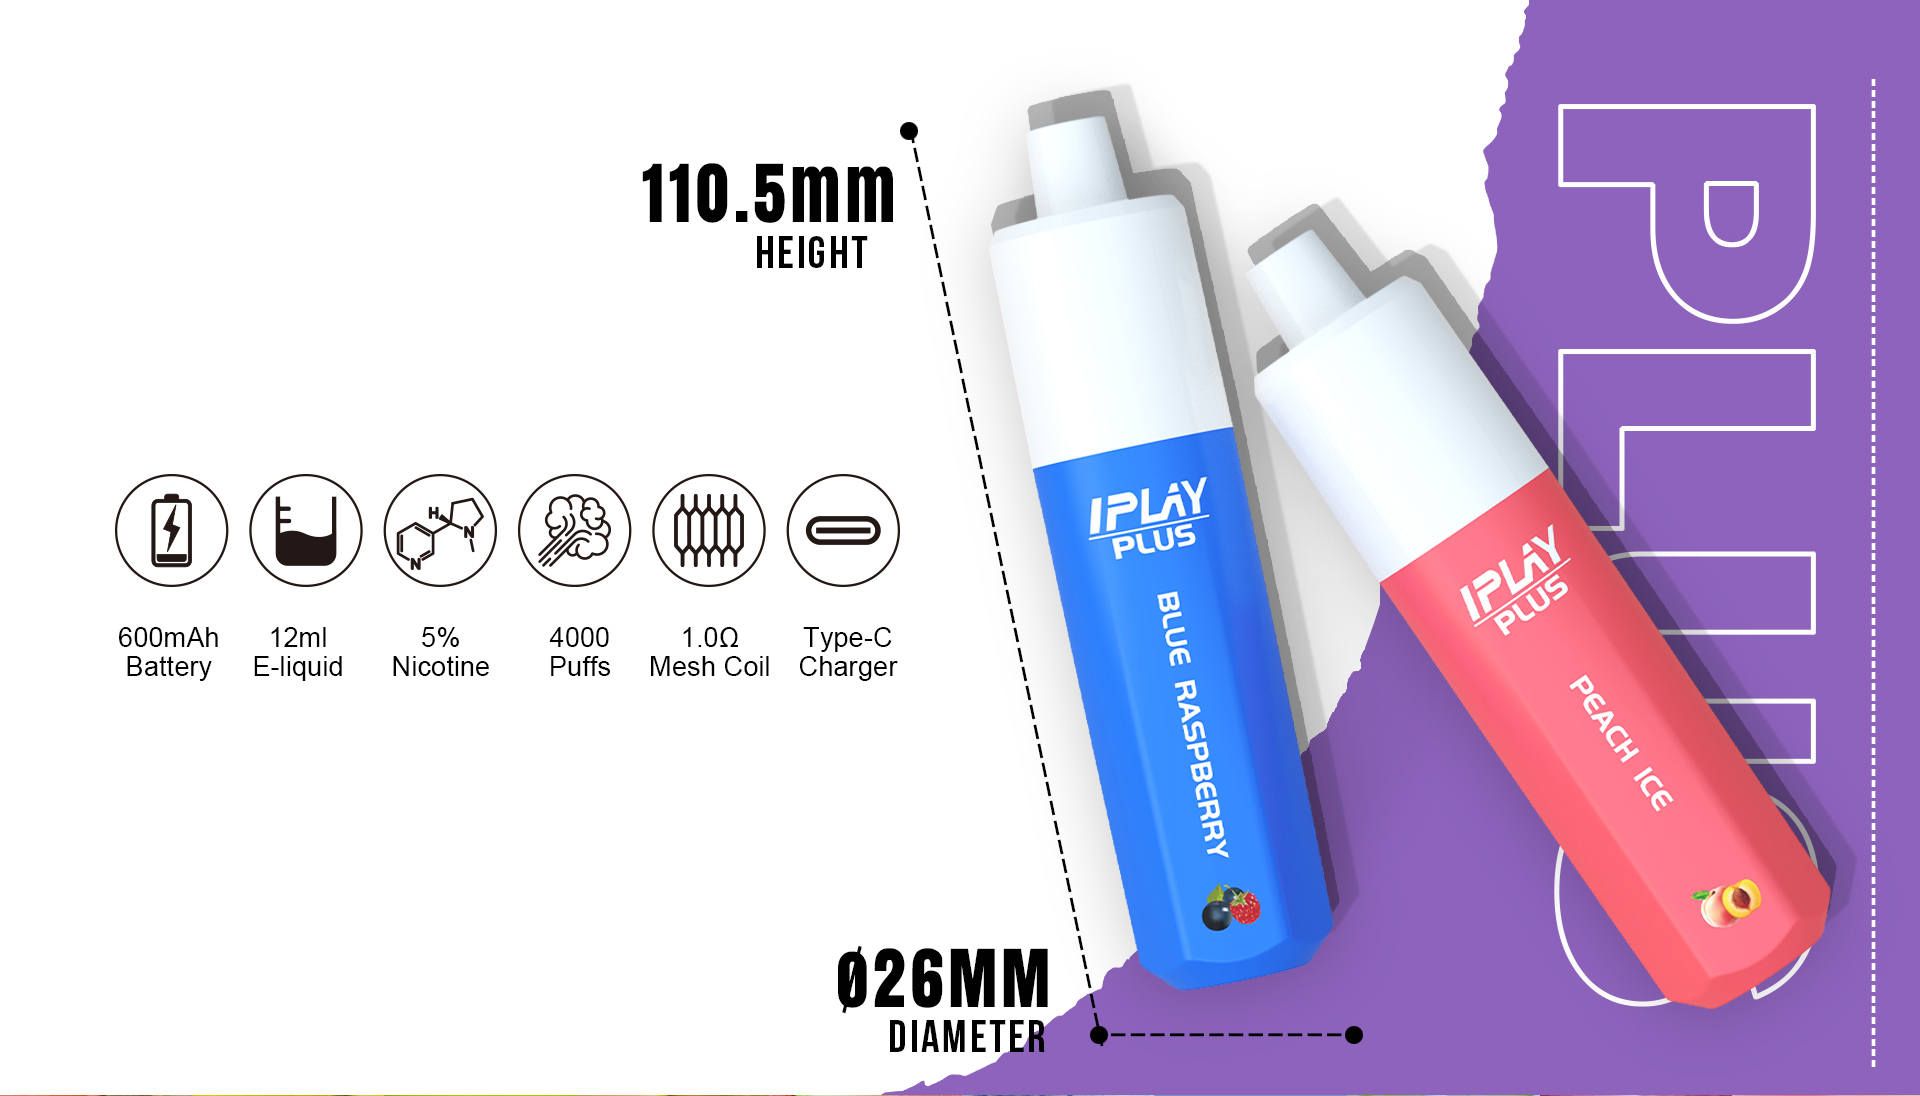 IPLAY PLUS DISPOSABLE VAPE - SPECIFICATIONS